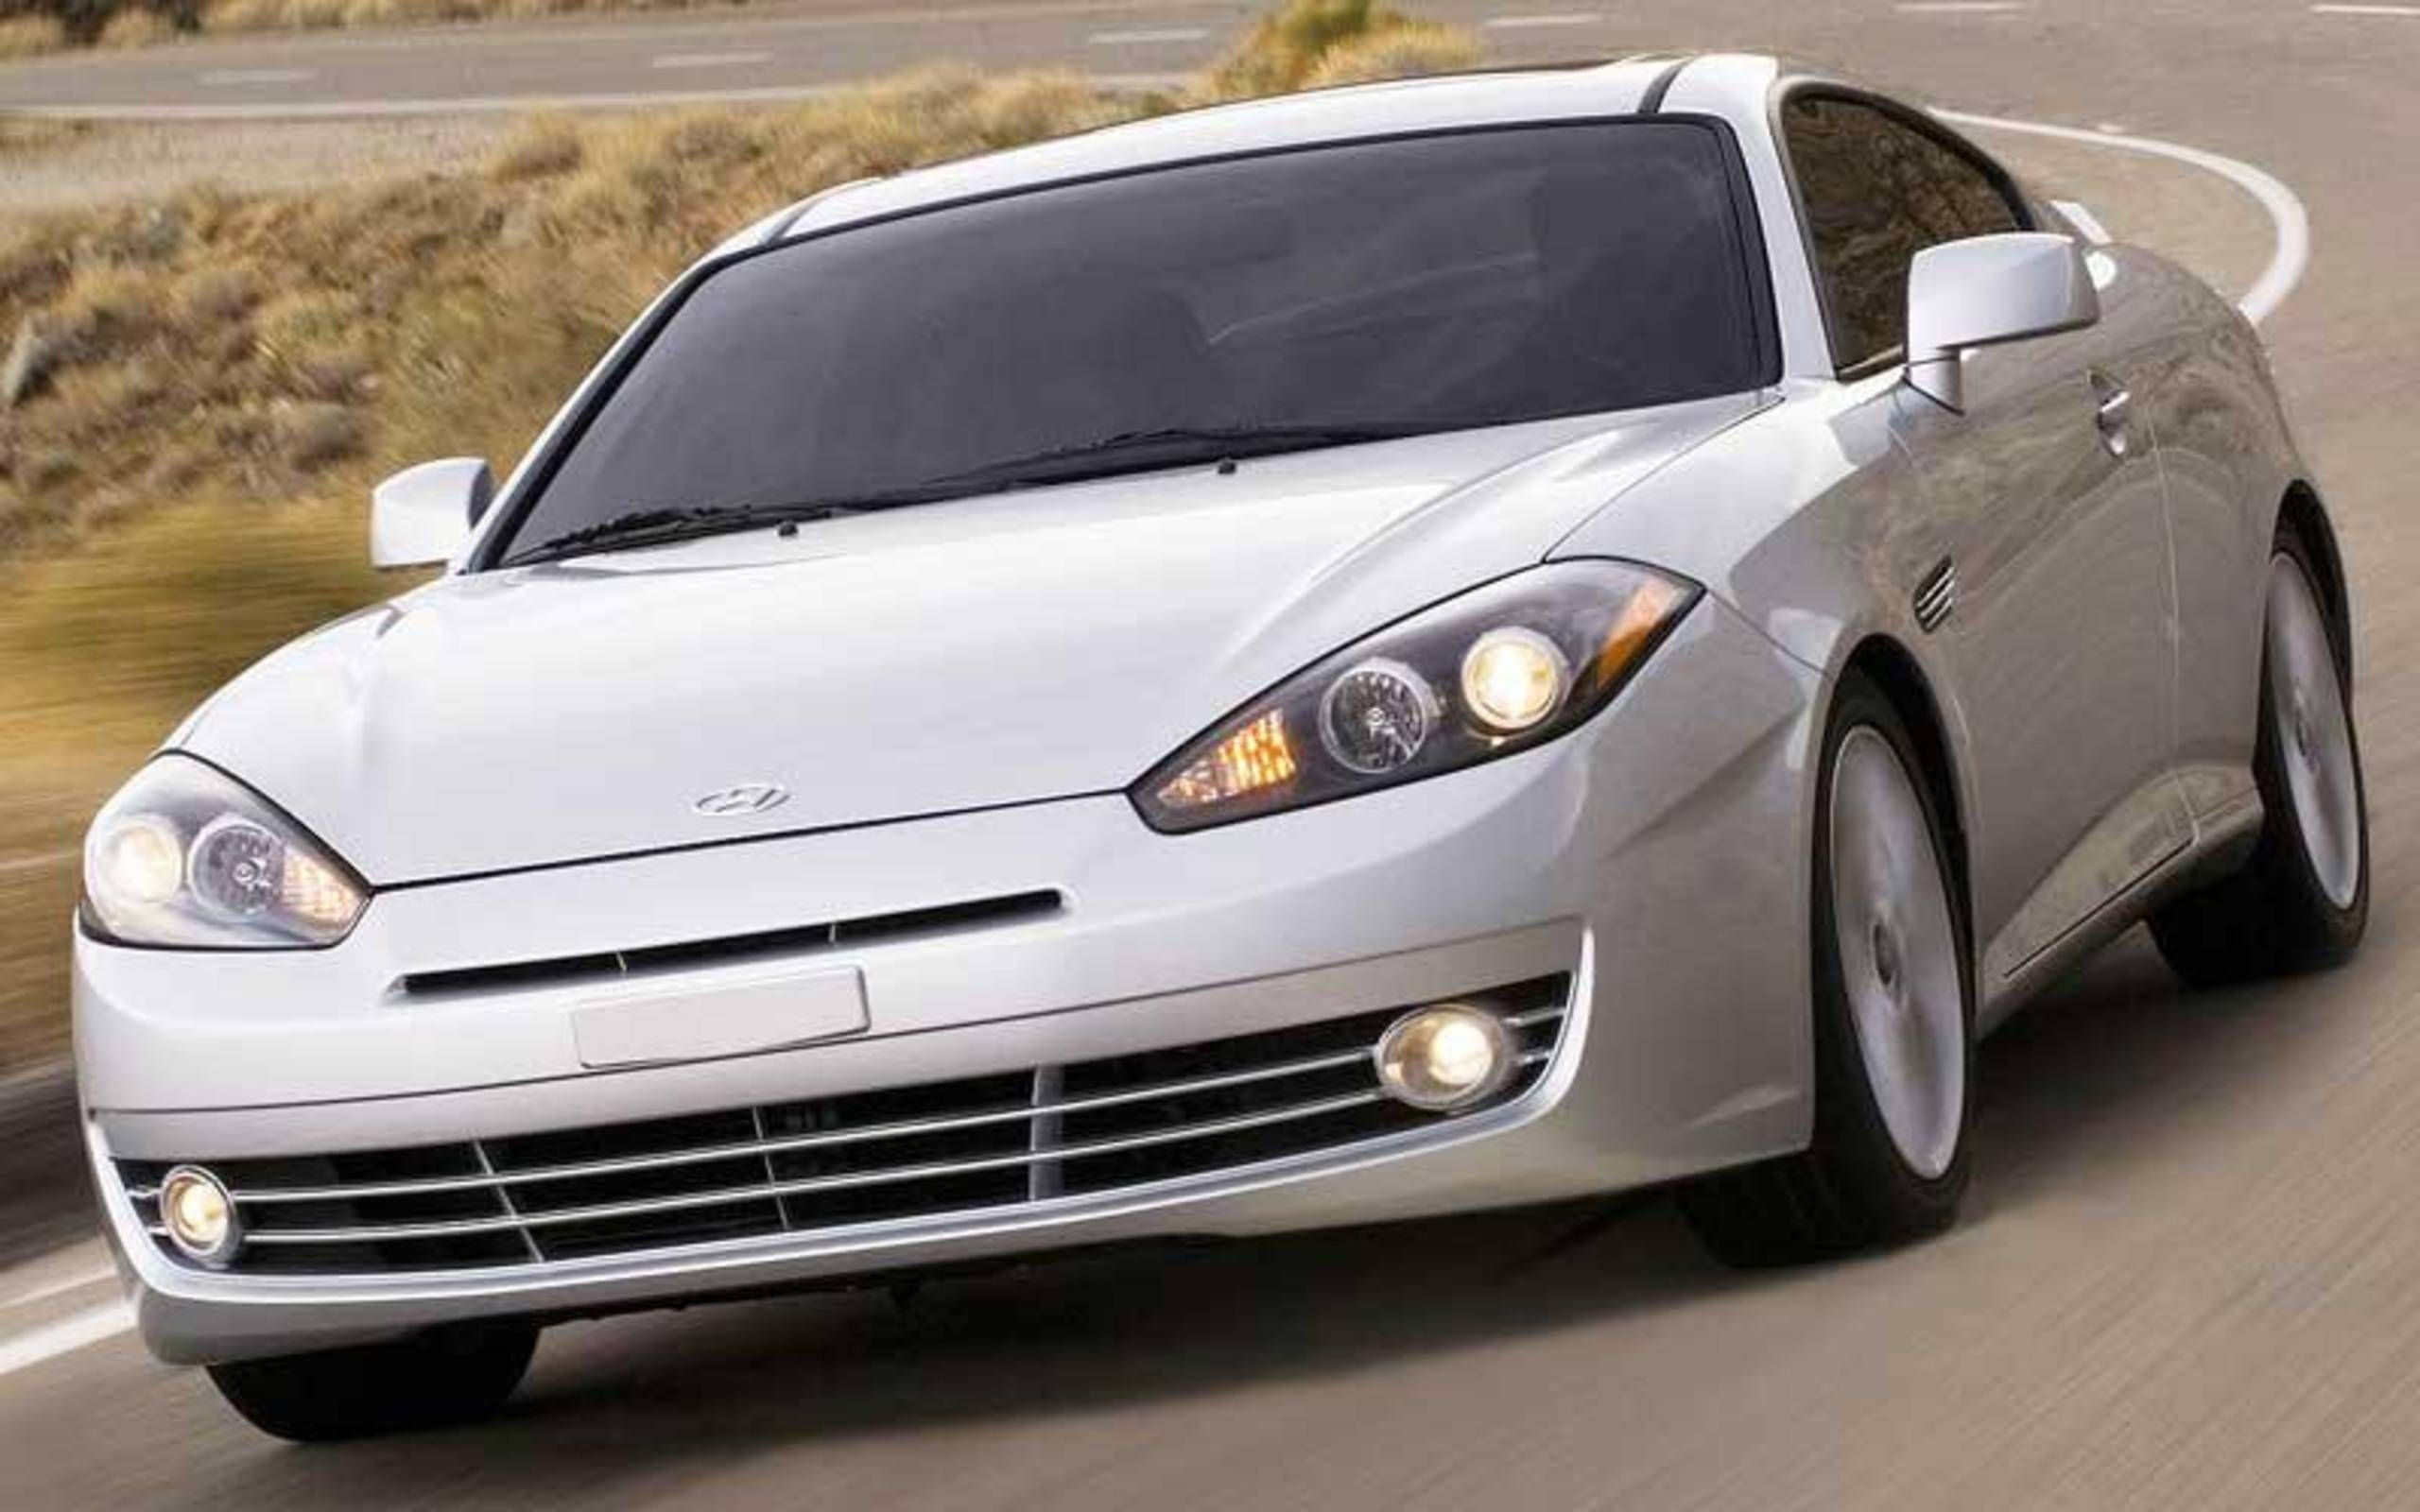 2007 HYUNDAI TIBURON: Are We 'Avin' A Laugh?: Well, Maybe A Little Chuckle